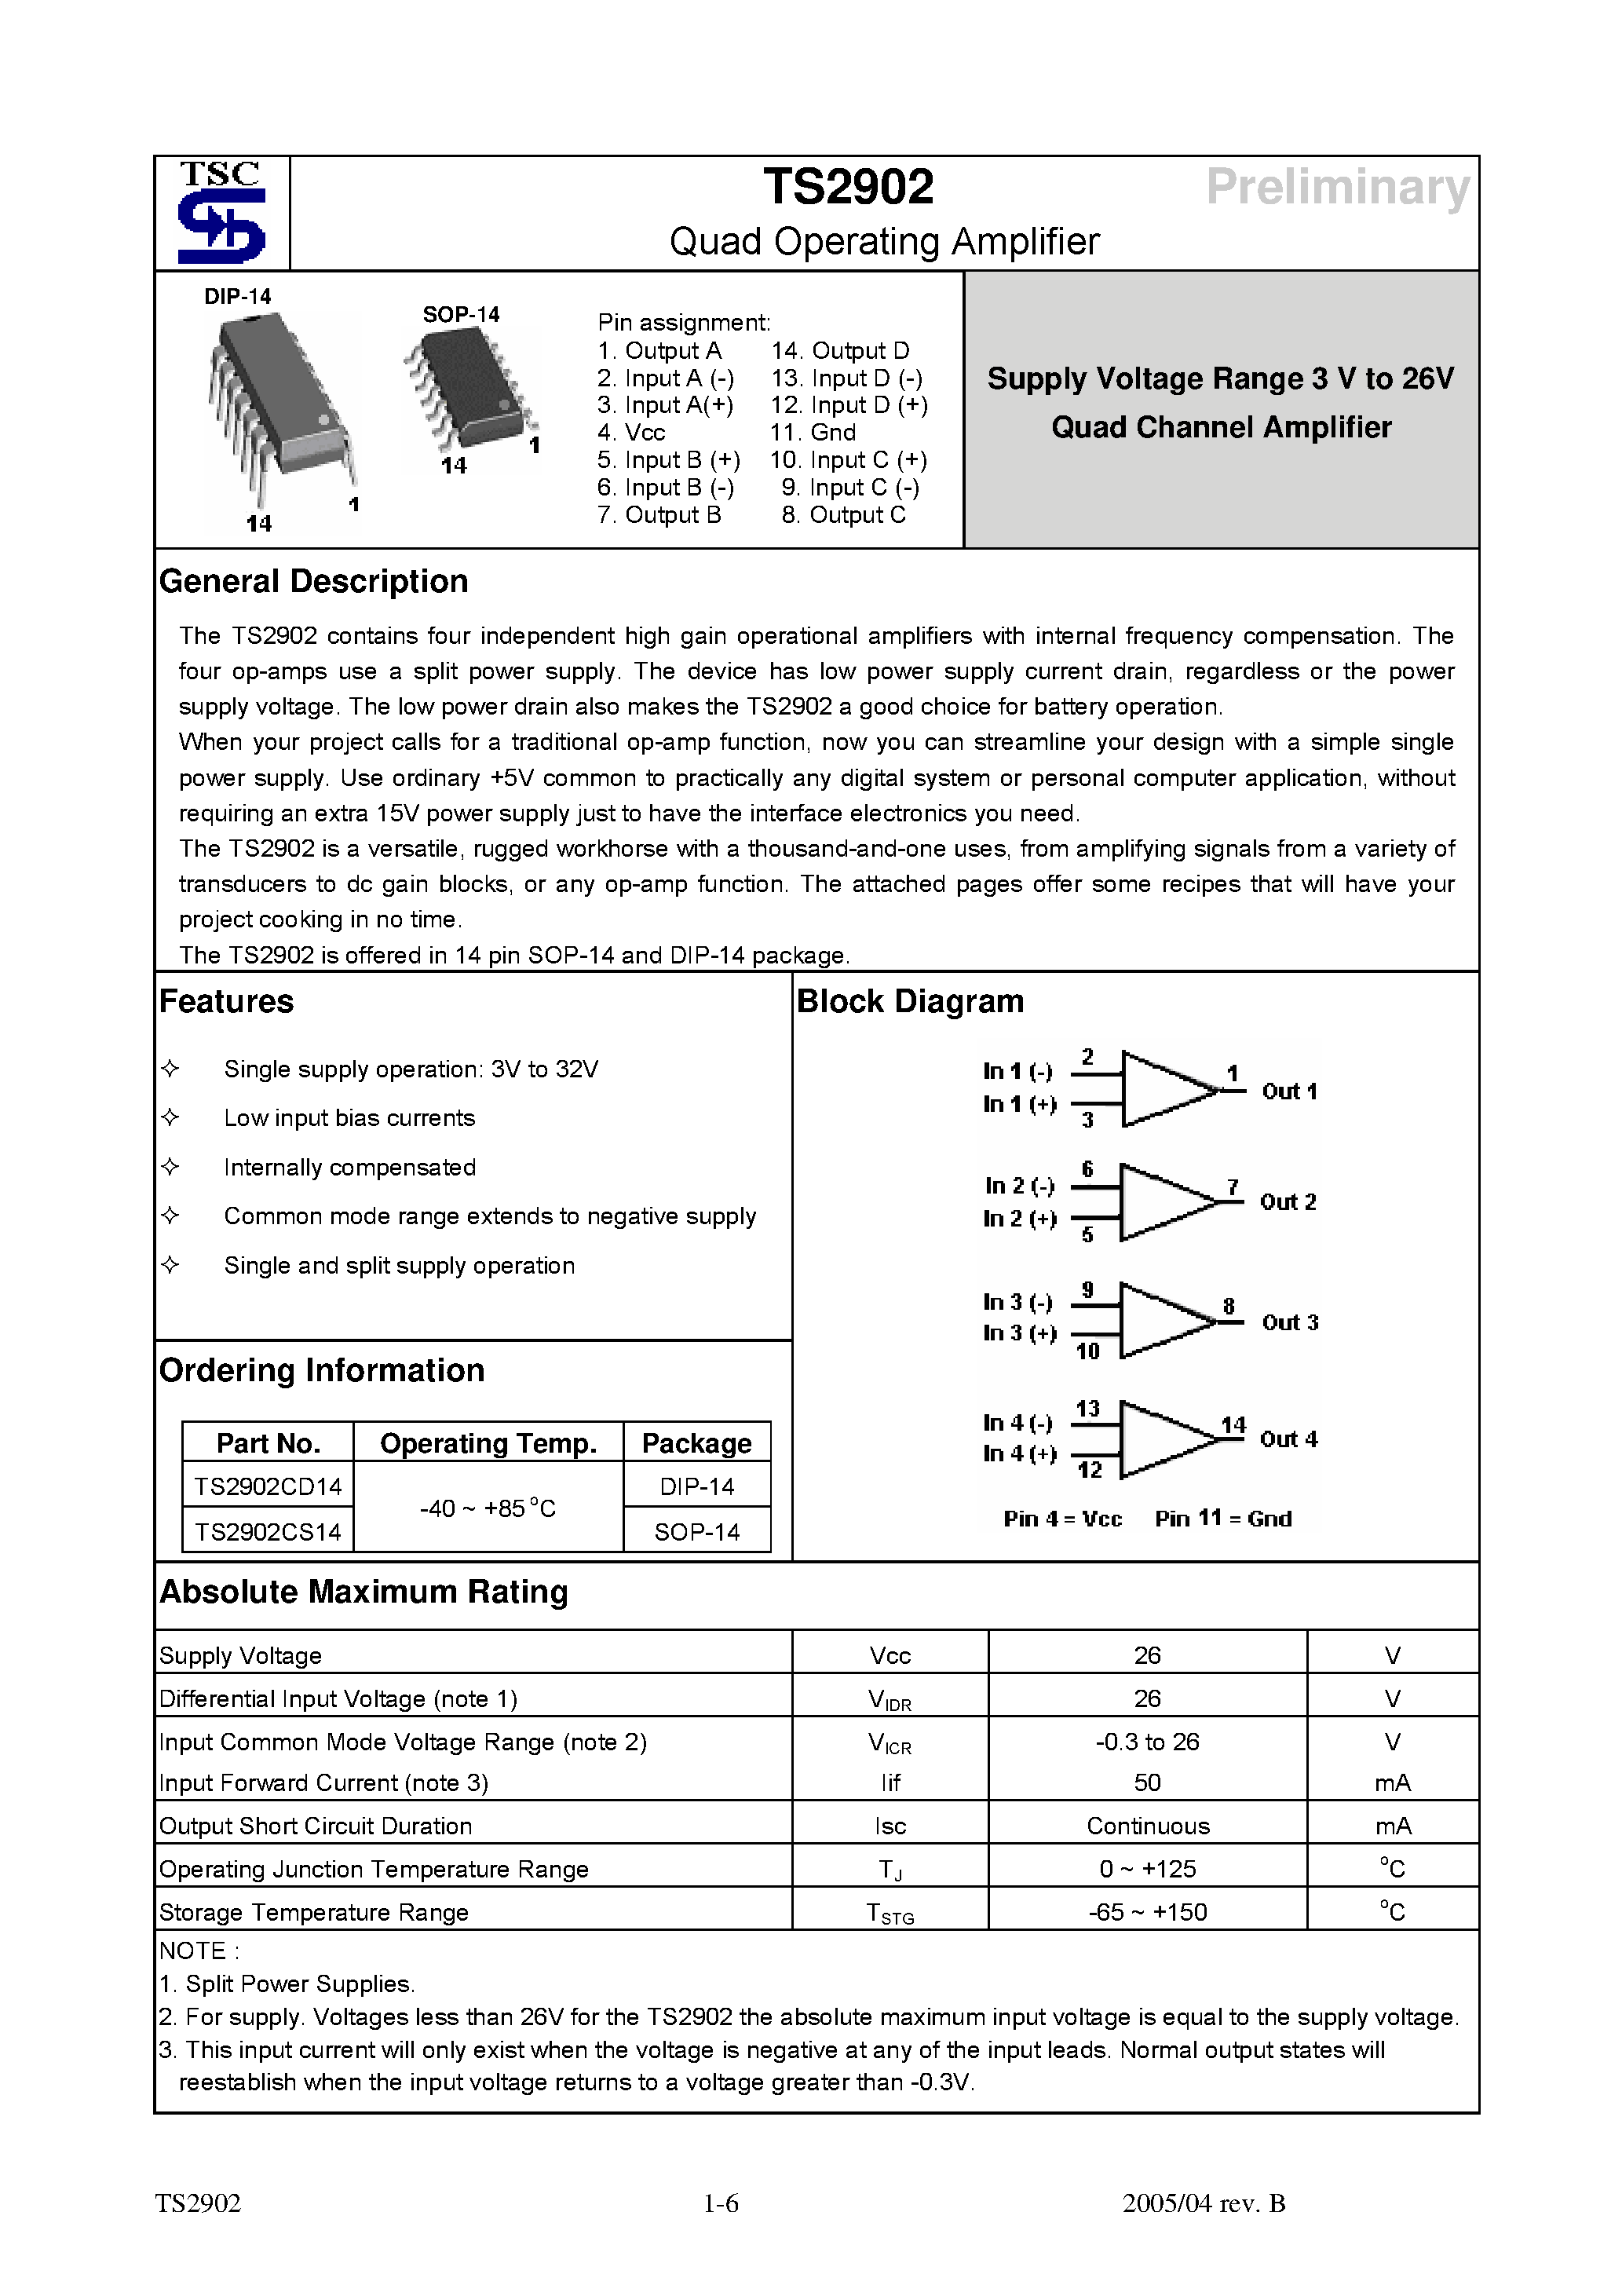 Datasheet TS2902 - Quad Operating Amplifier page 1